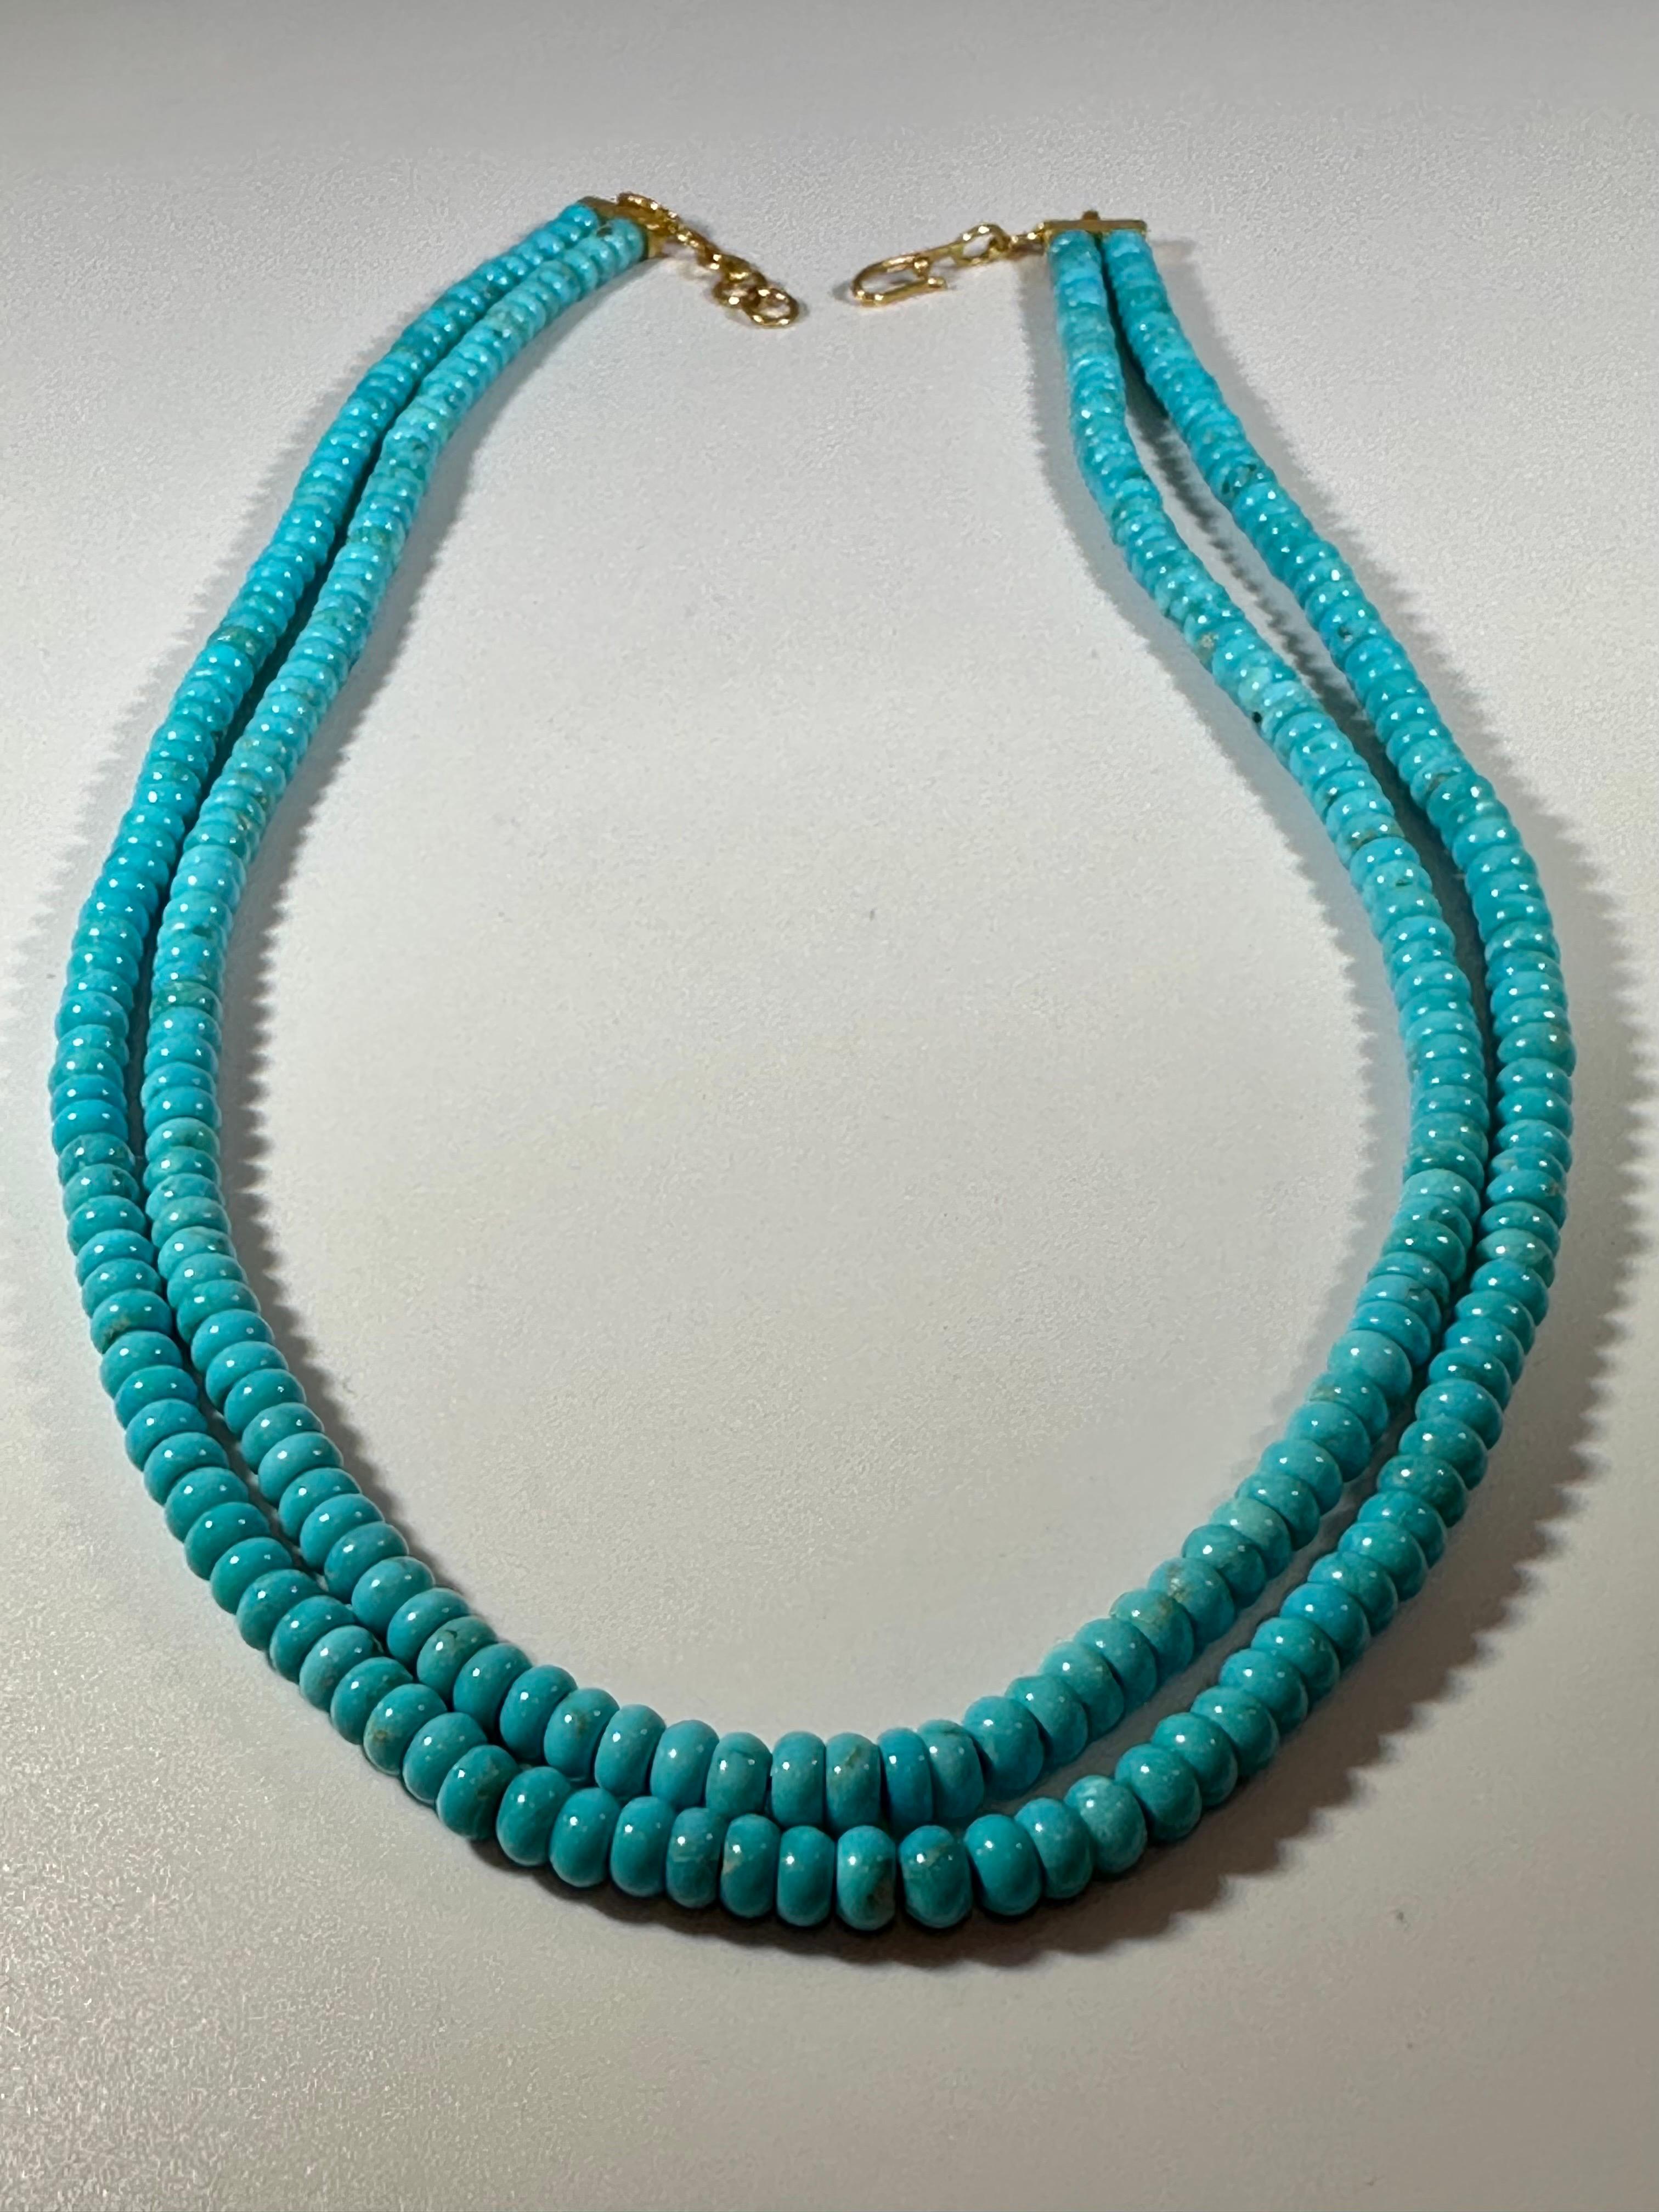 215 Carat Natural Sleeping Beauty Turquoise Necklace, Two Strand 14 Karat Gold For Sale 4